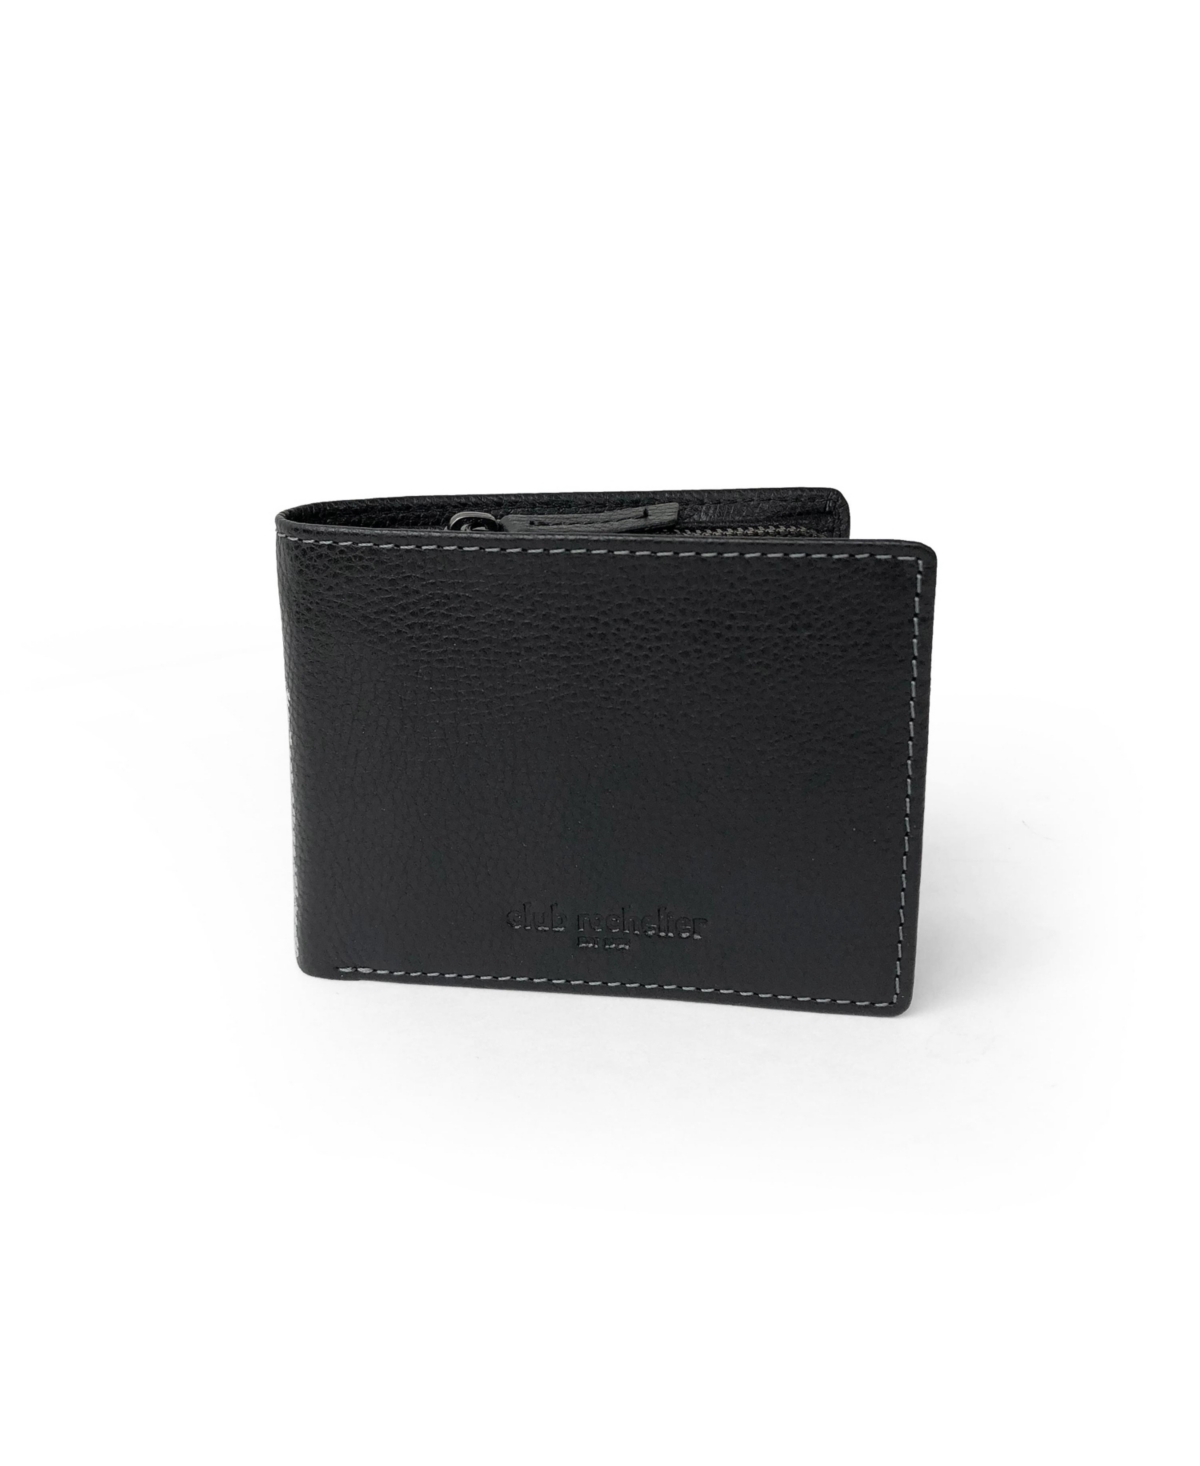 CLUB ROCHELIER MEN'S SLIM FULL LEATHER WALLET WITH ZIPPERED POCKET